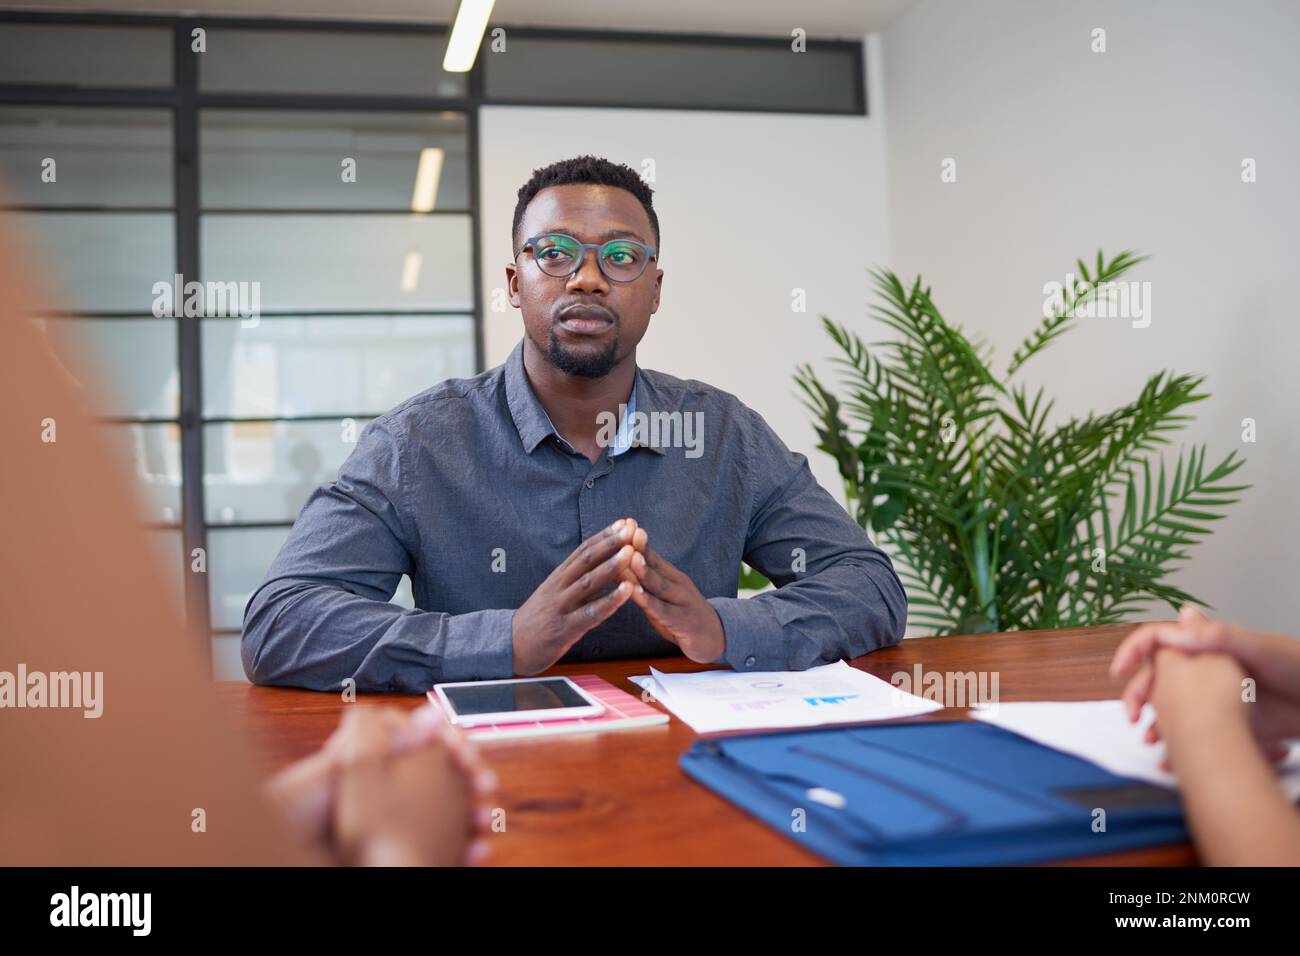 Serious Black businessman during boardroom meeting, considering proposal Stock Photo